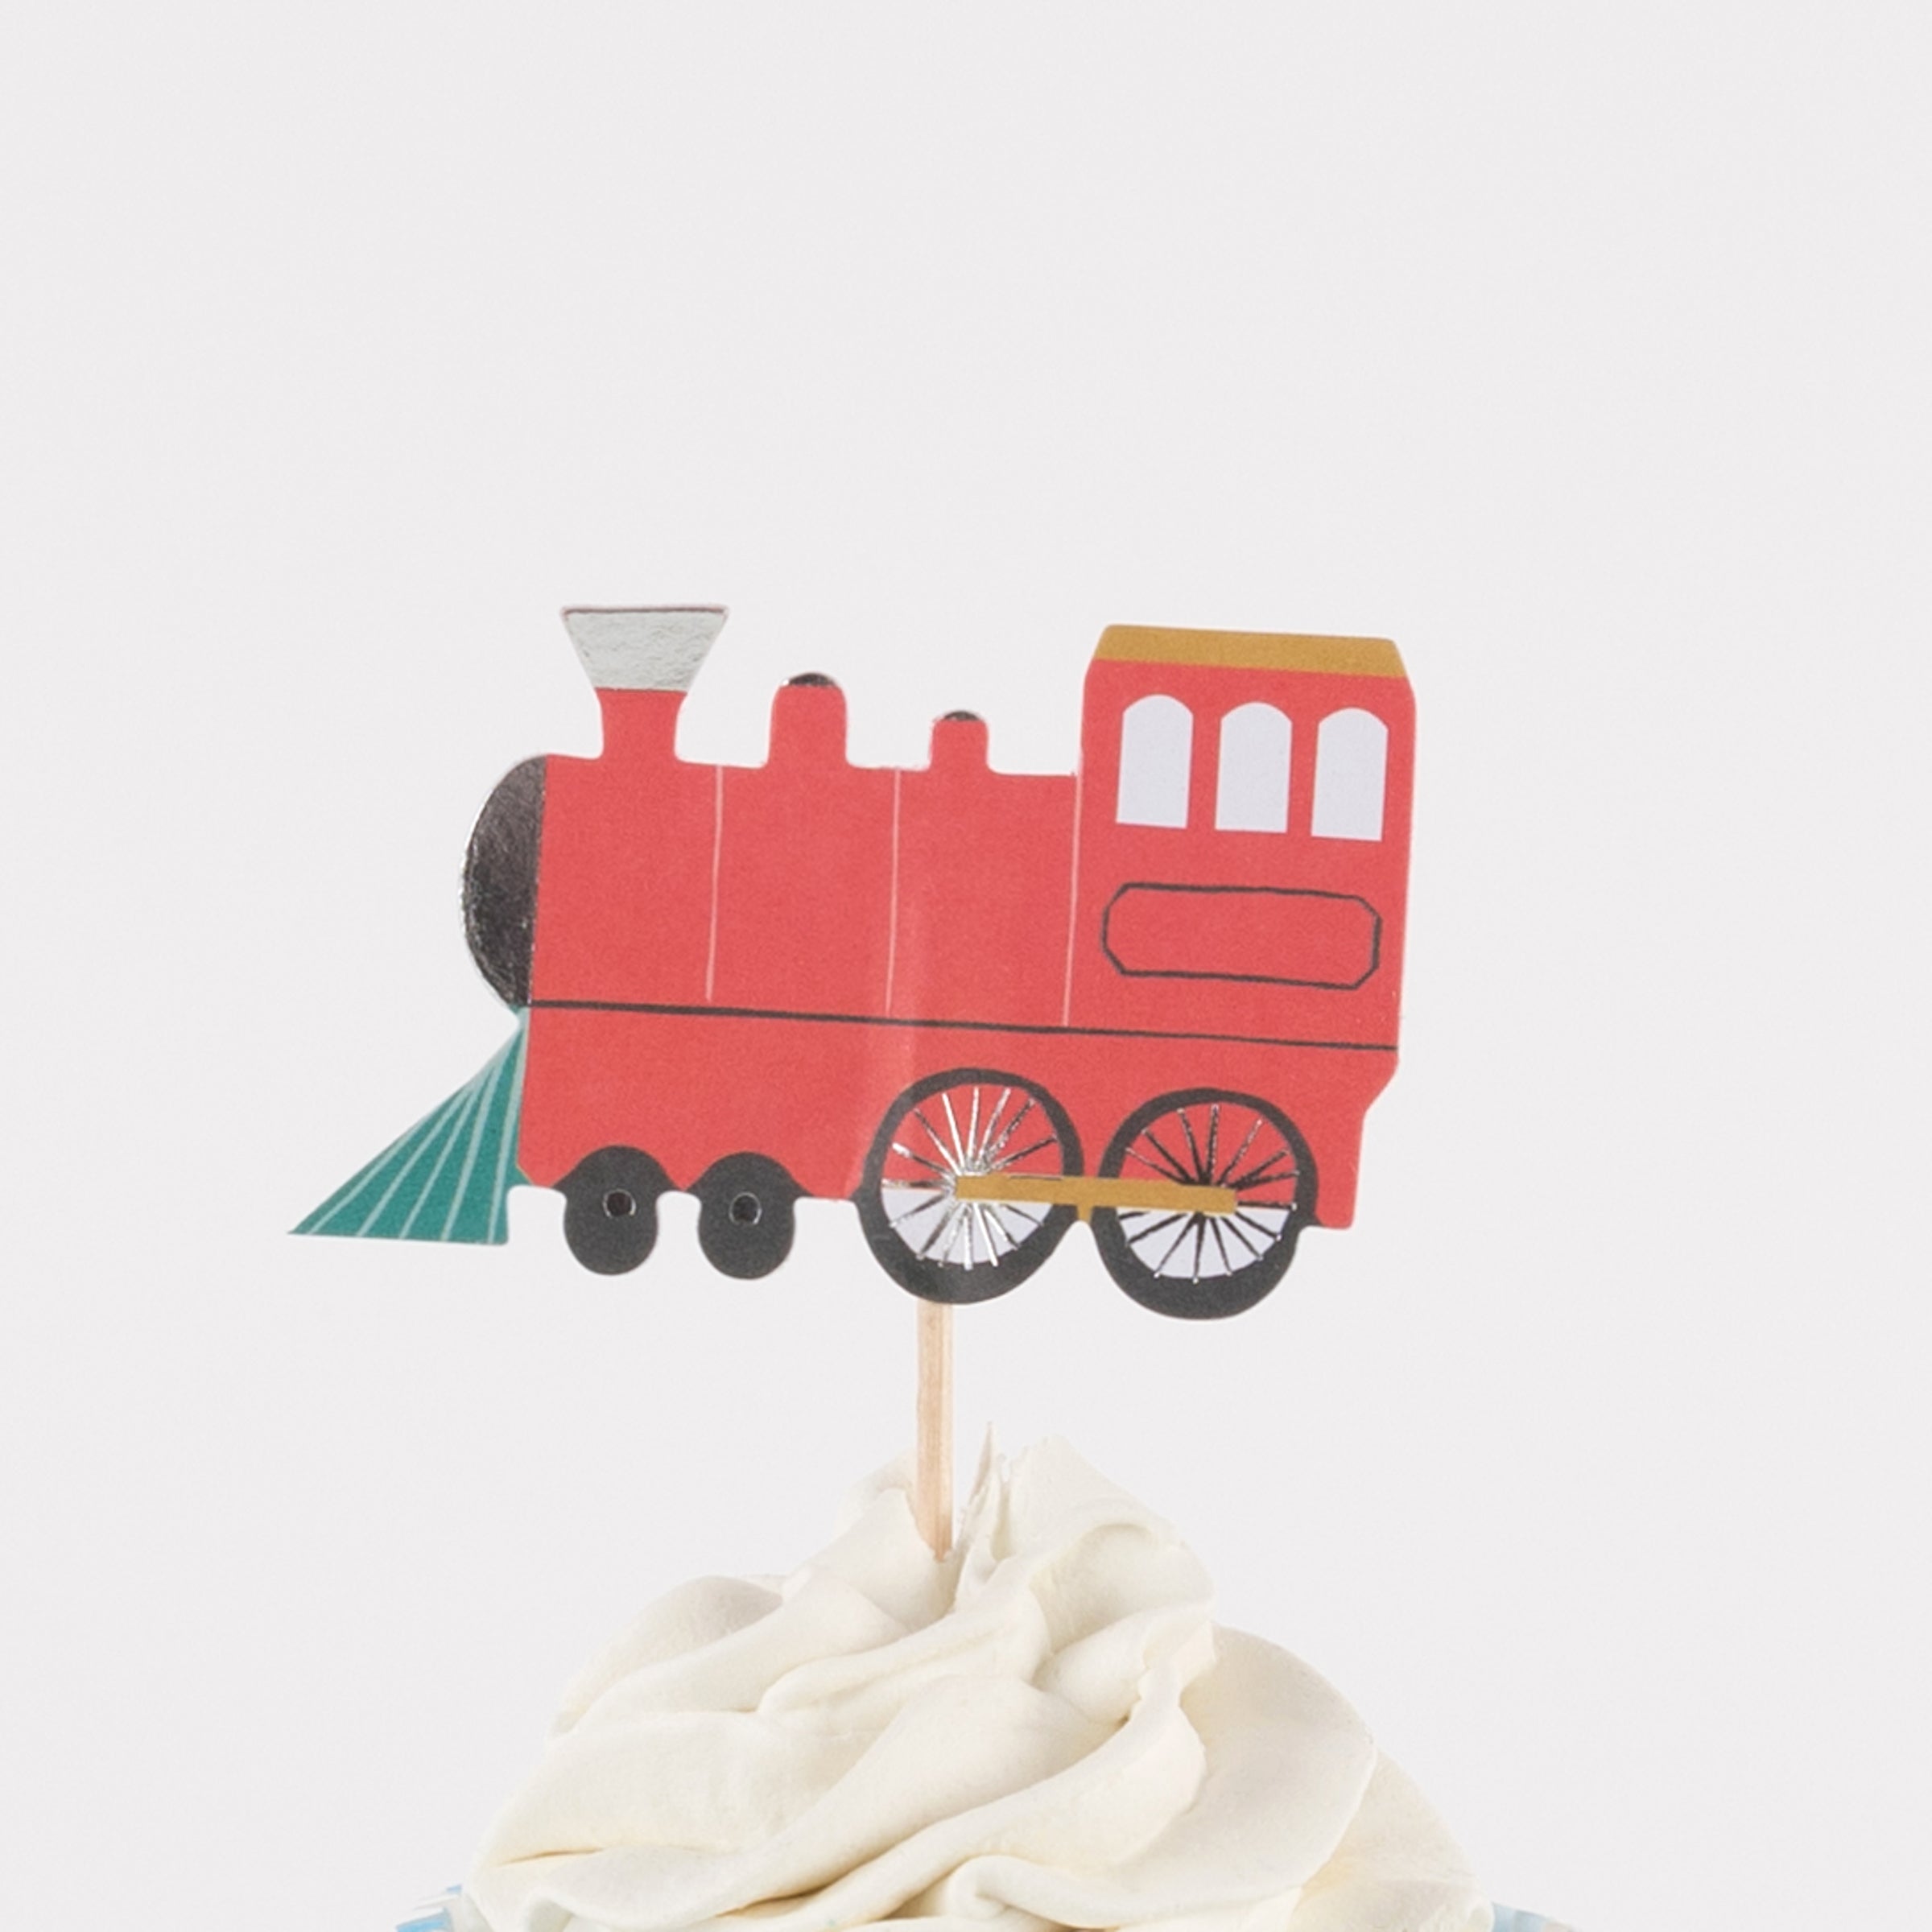 Our special cupcake kit feature train cake toppers and striped blue and teal cupcake cases.